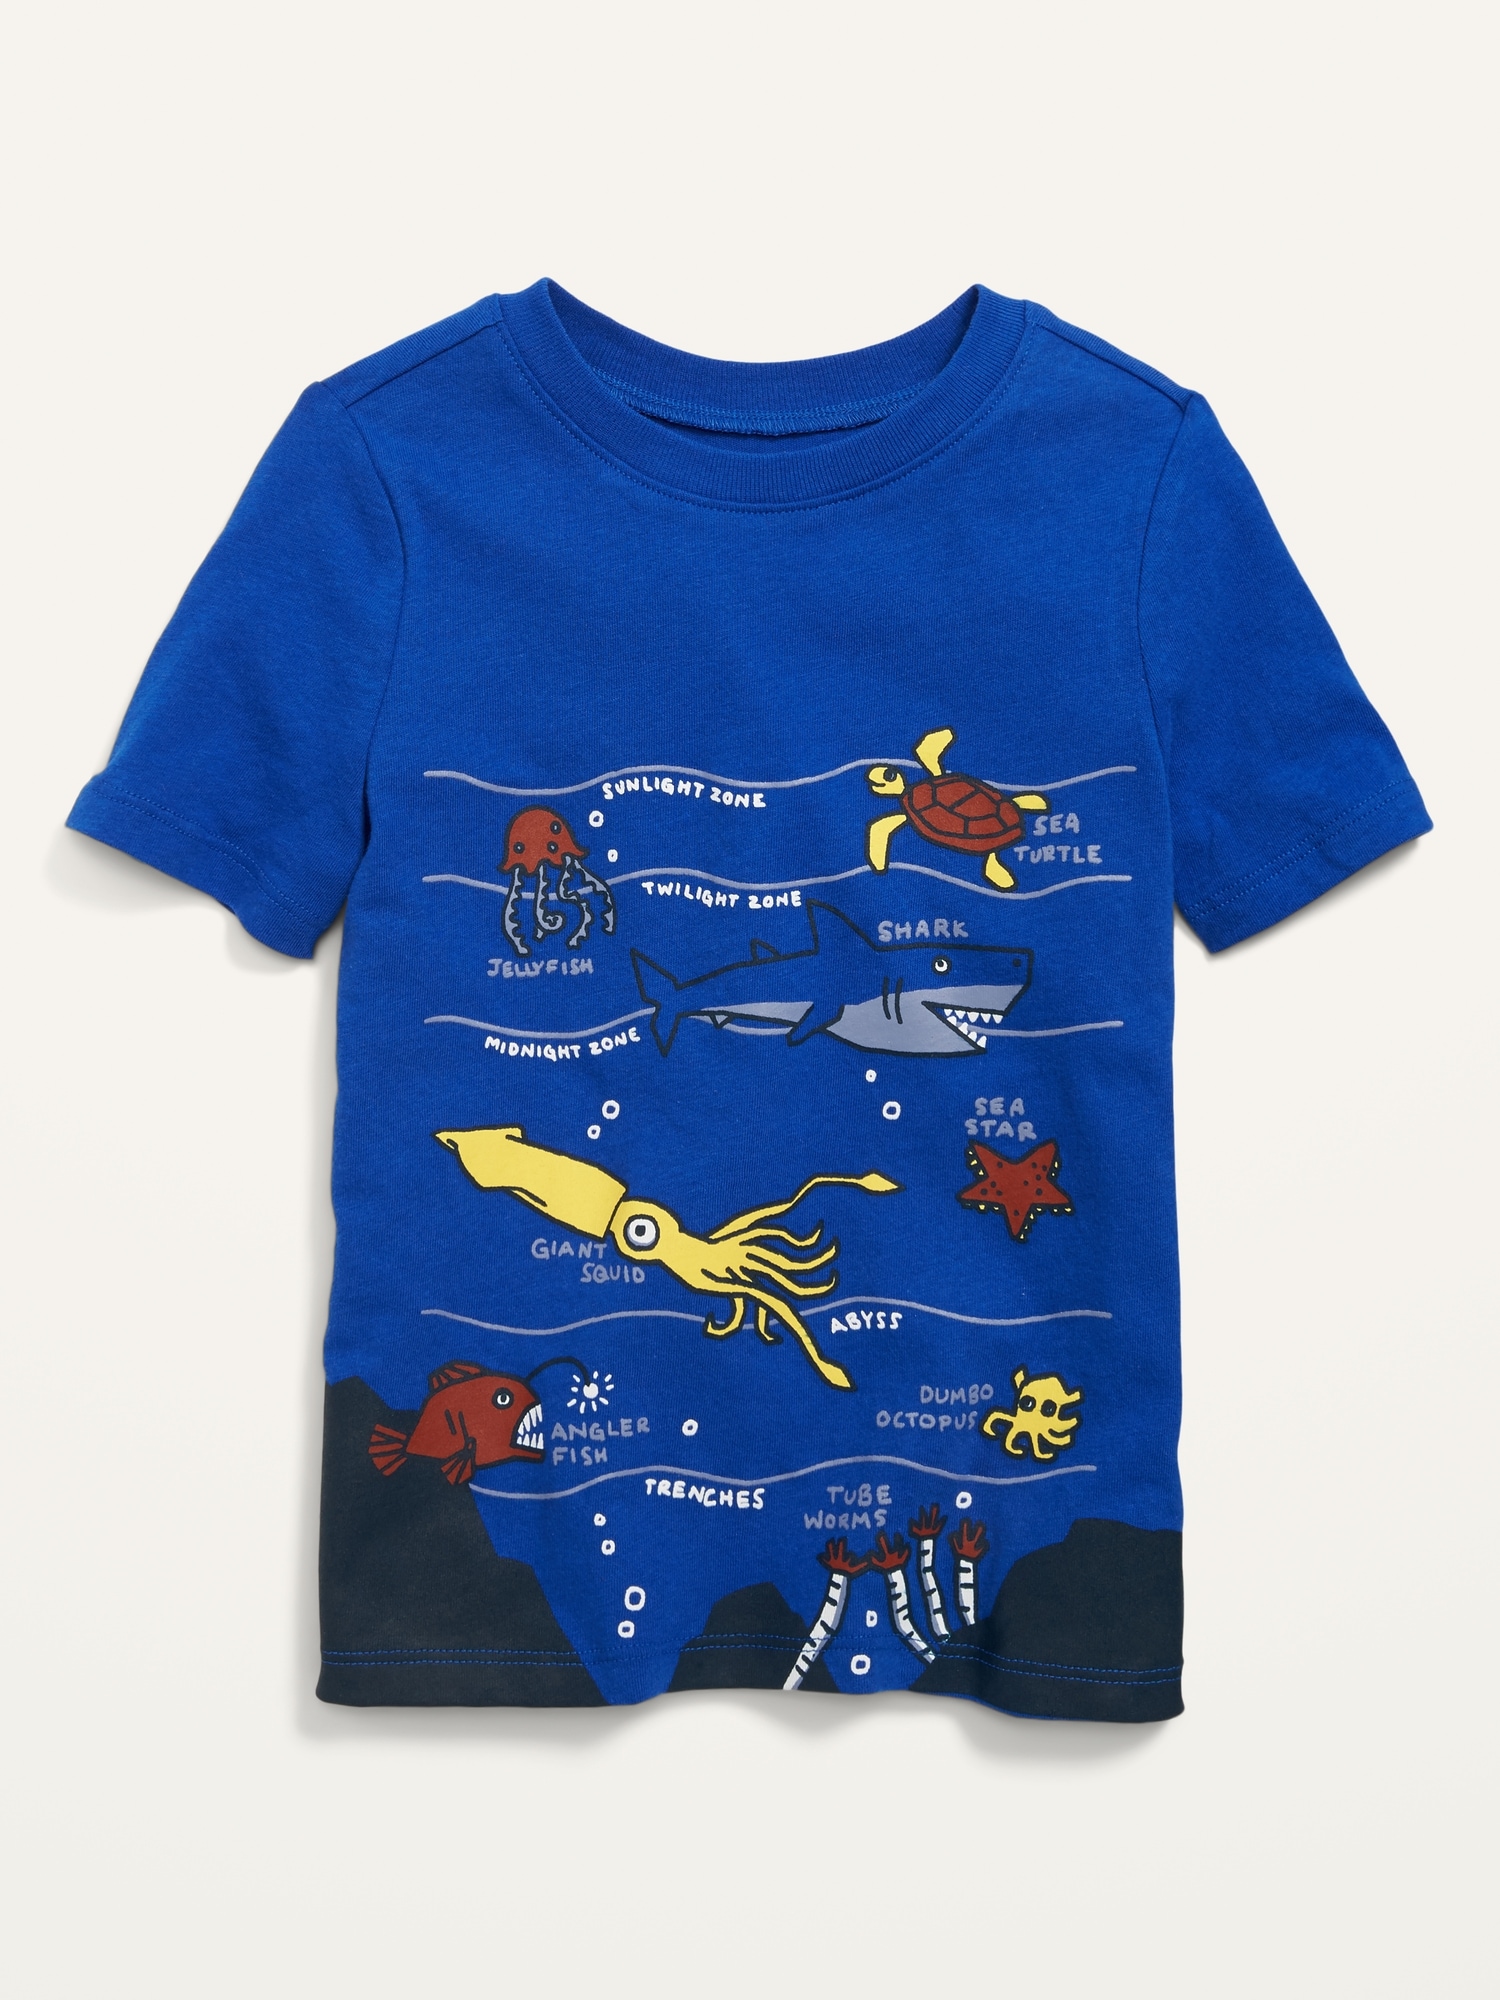 Unisex Short-Sleeve Graphic Tee for Toddler